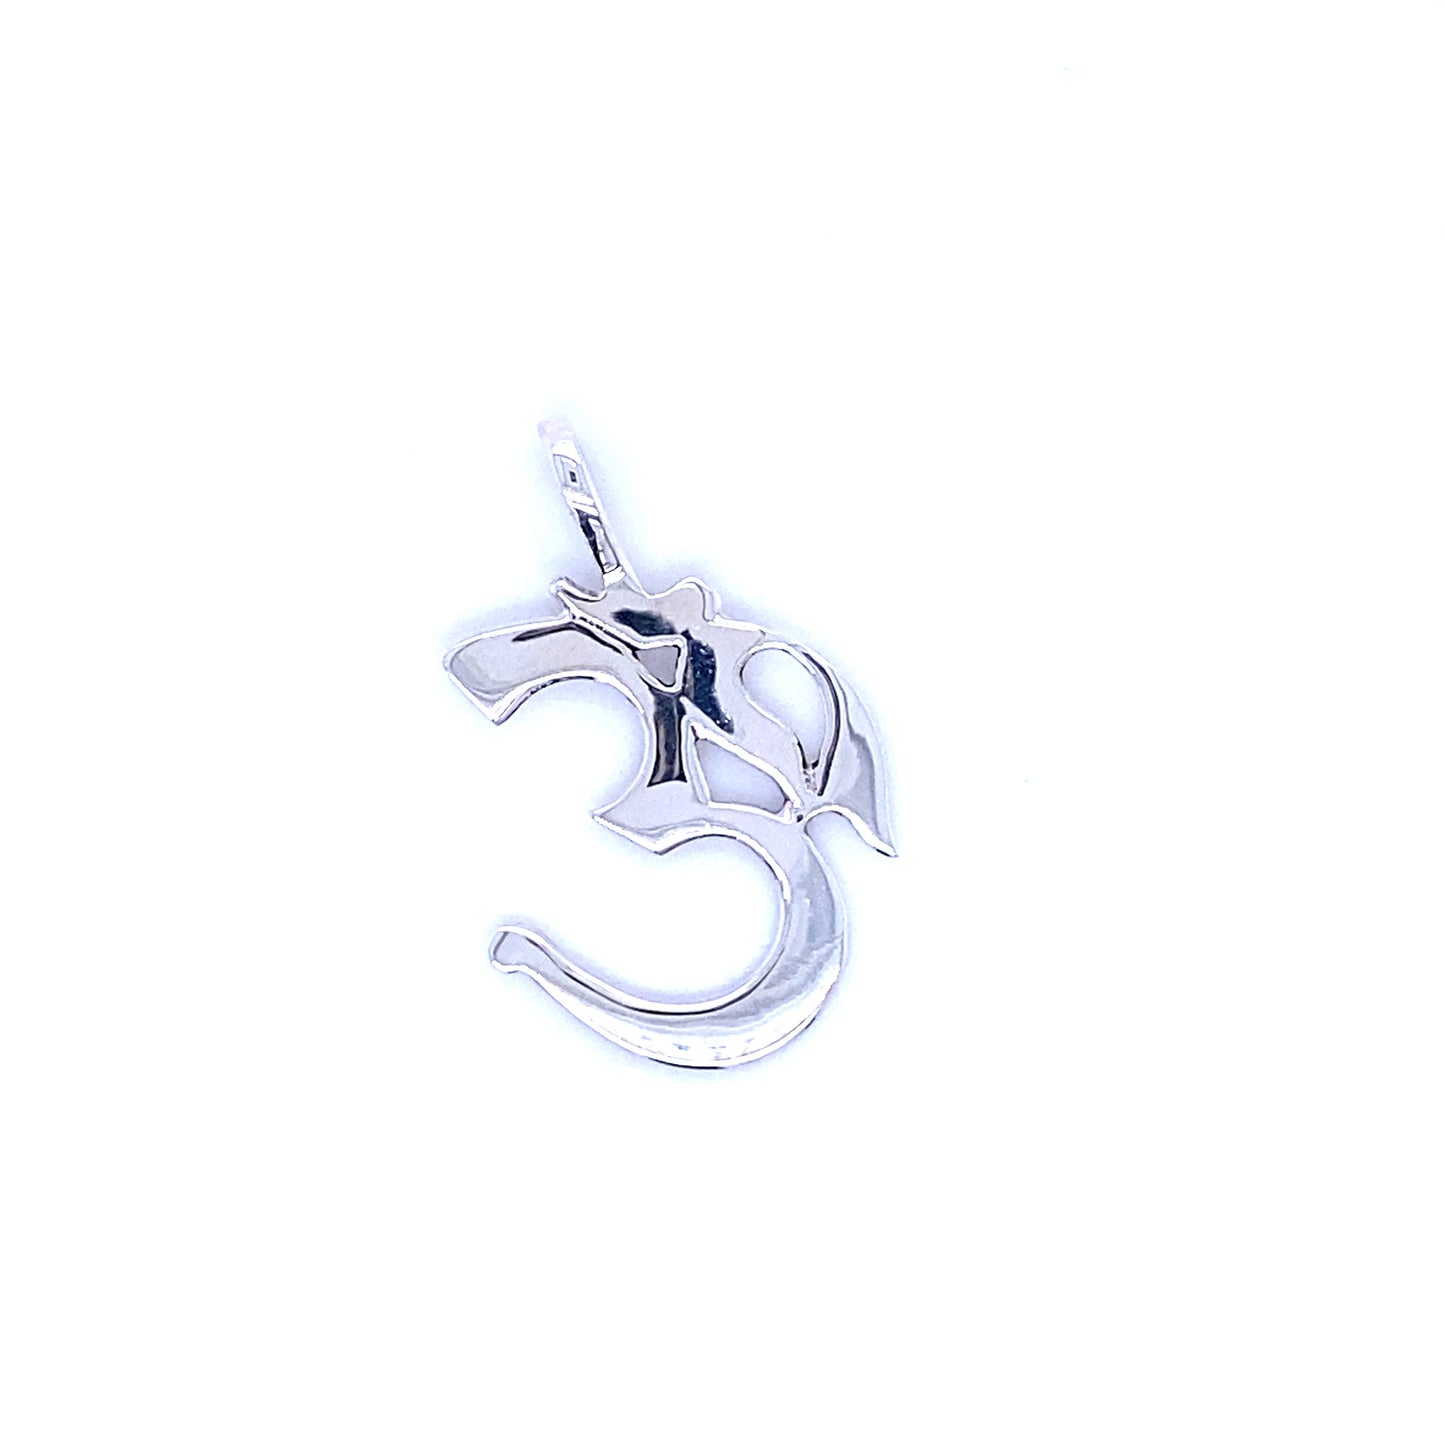 A Simple Om pendant symbol on a white background from Super Silver.